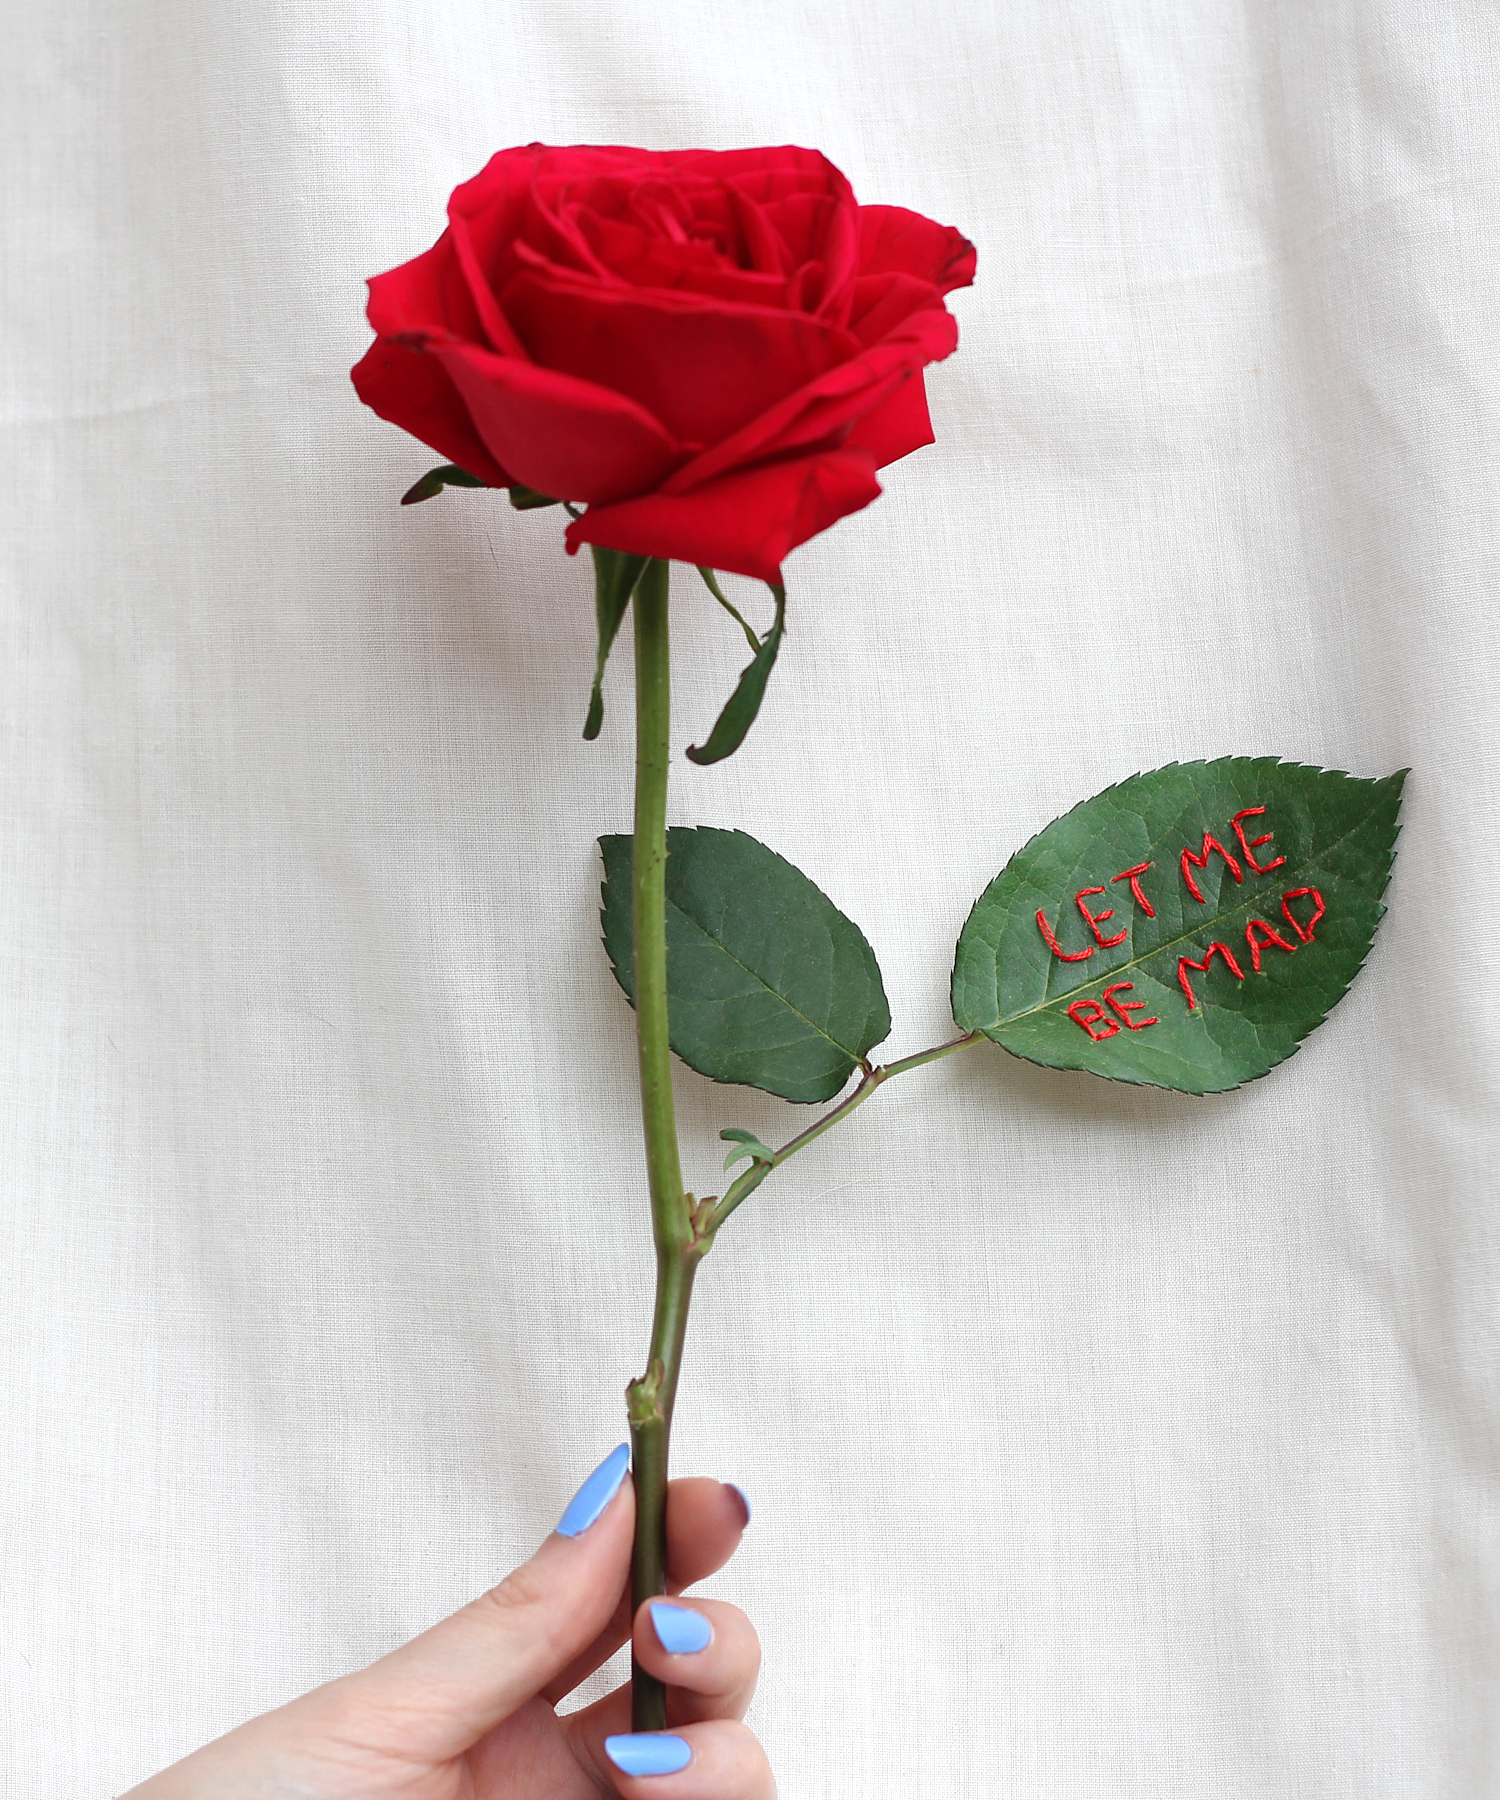 embroidered real rose "let me be mad" by Sophie King